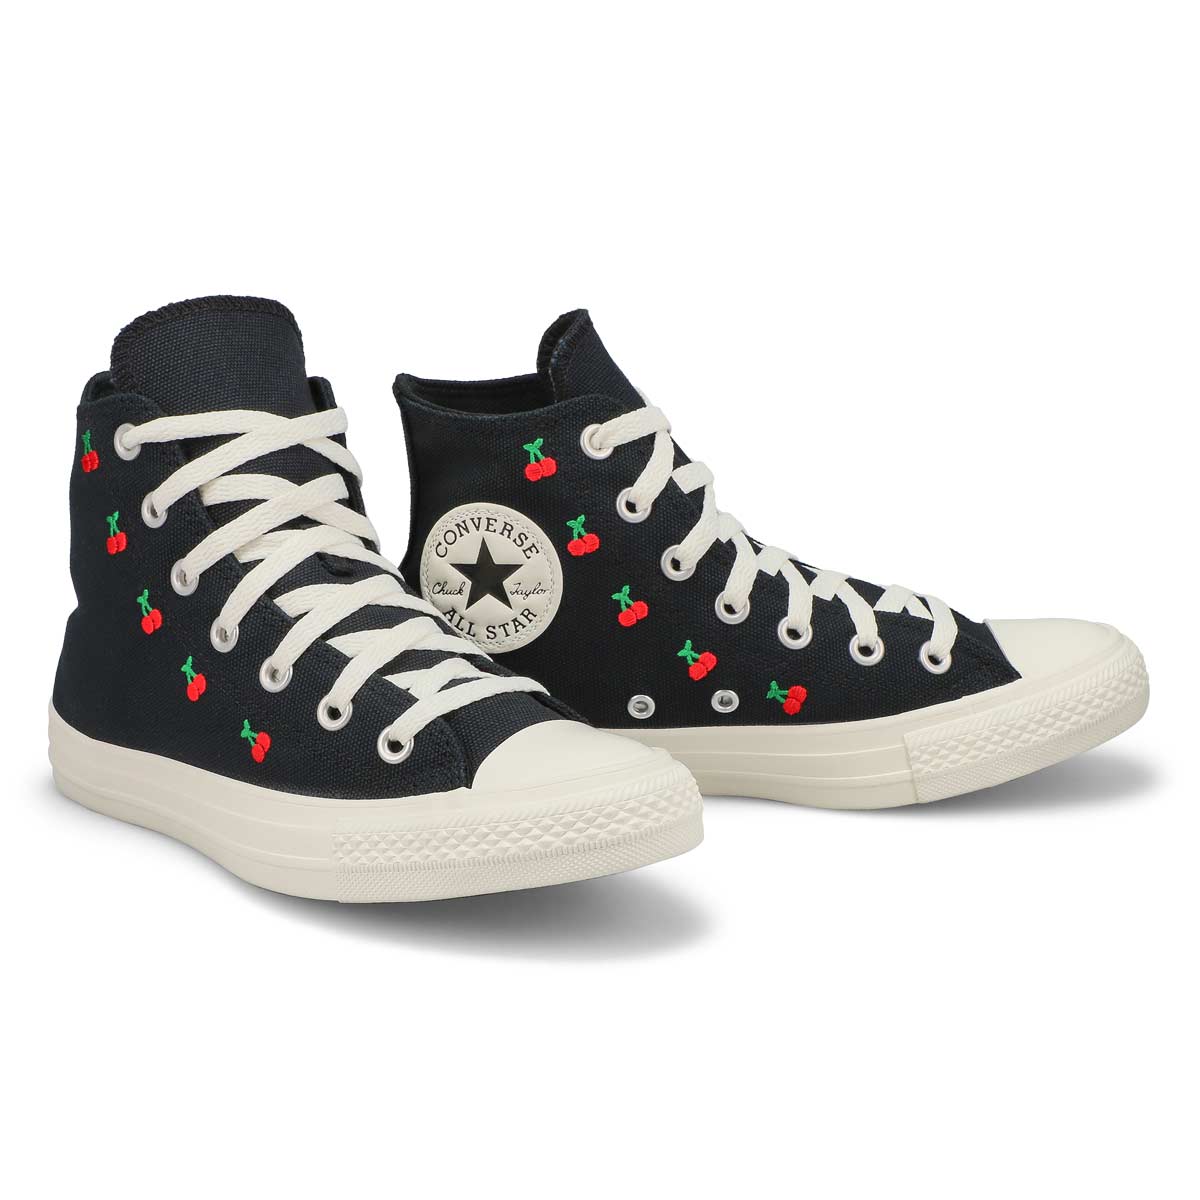 Womens Chuck Taylor All Star Cherry On Hi Top Sneaker - Black/Egret/Red